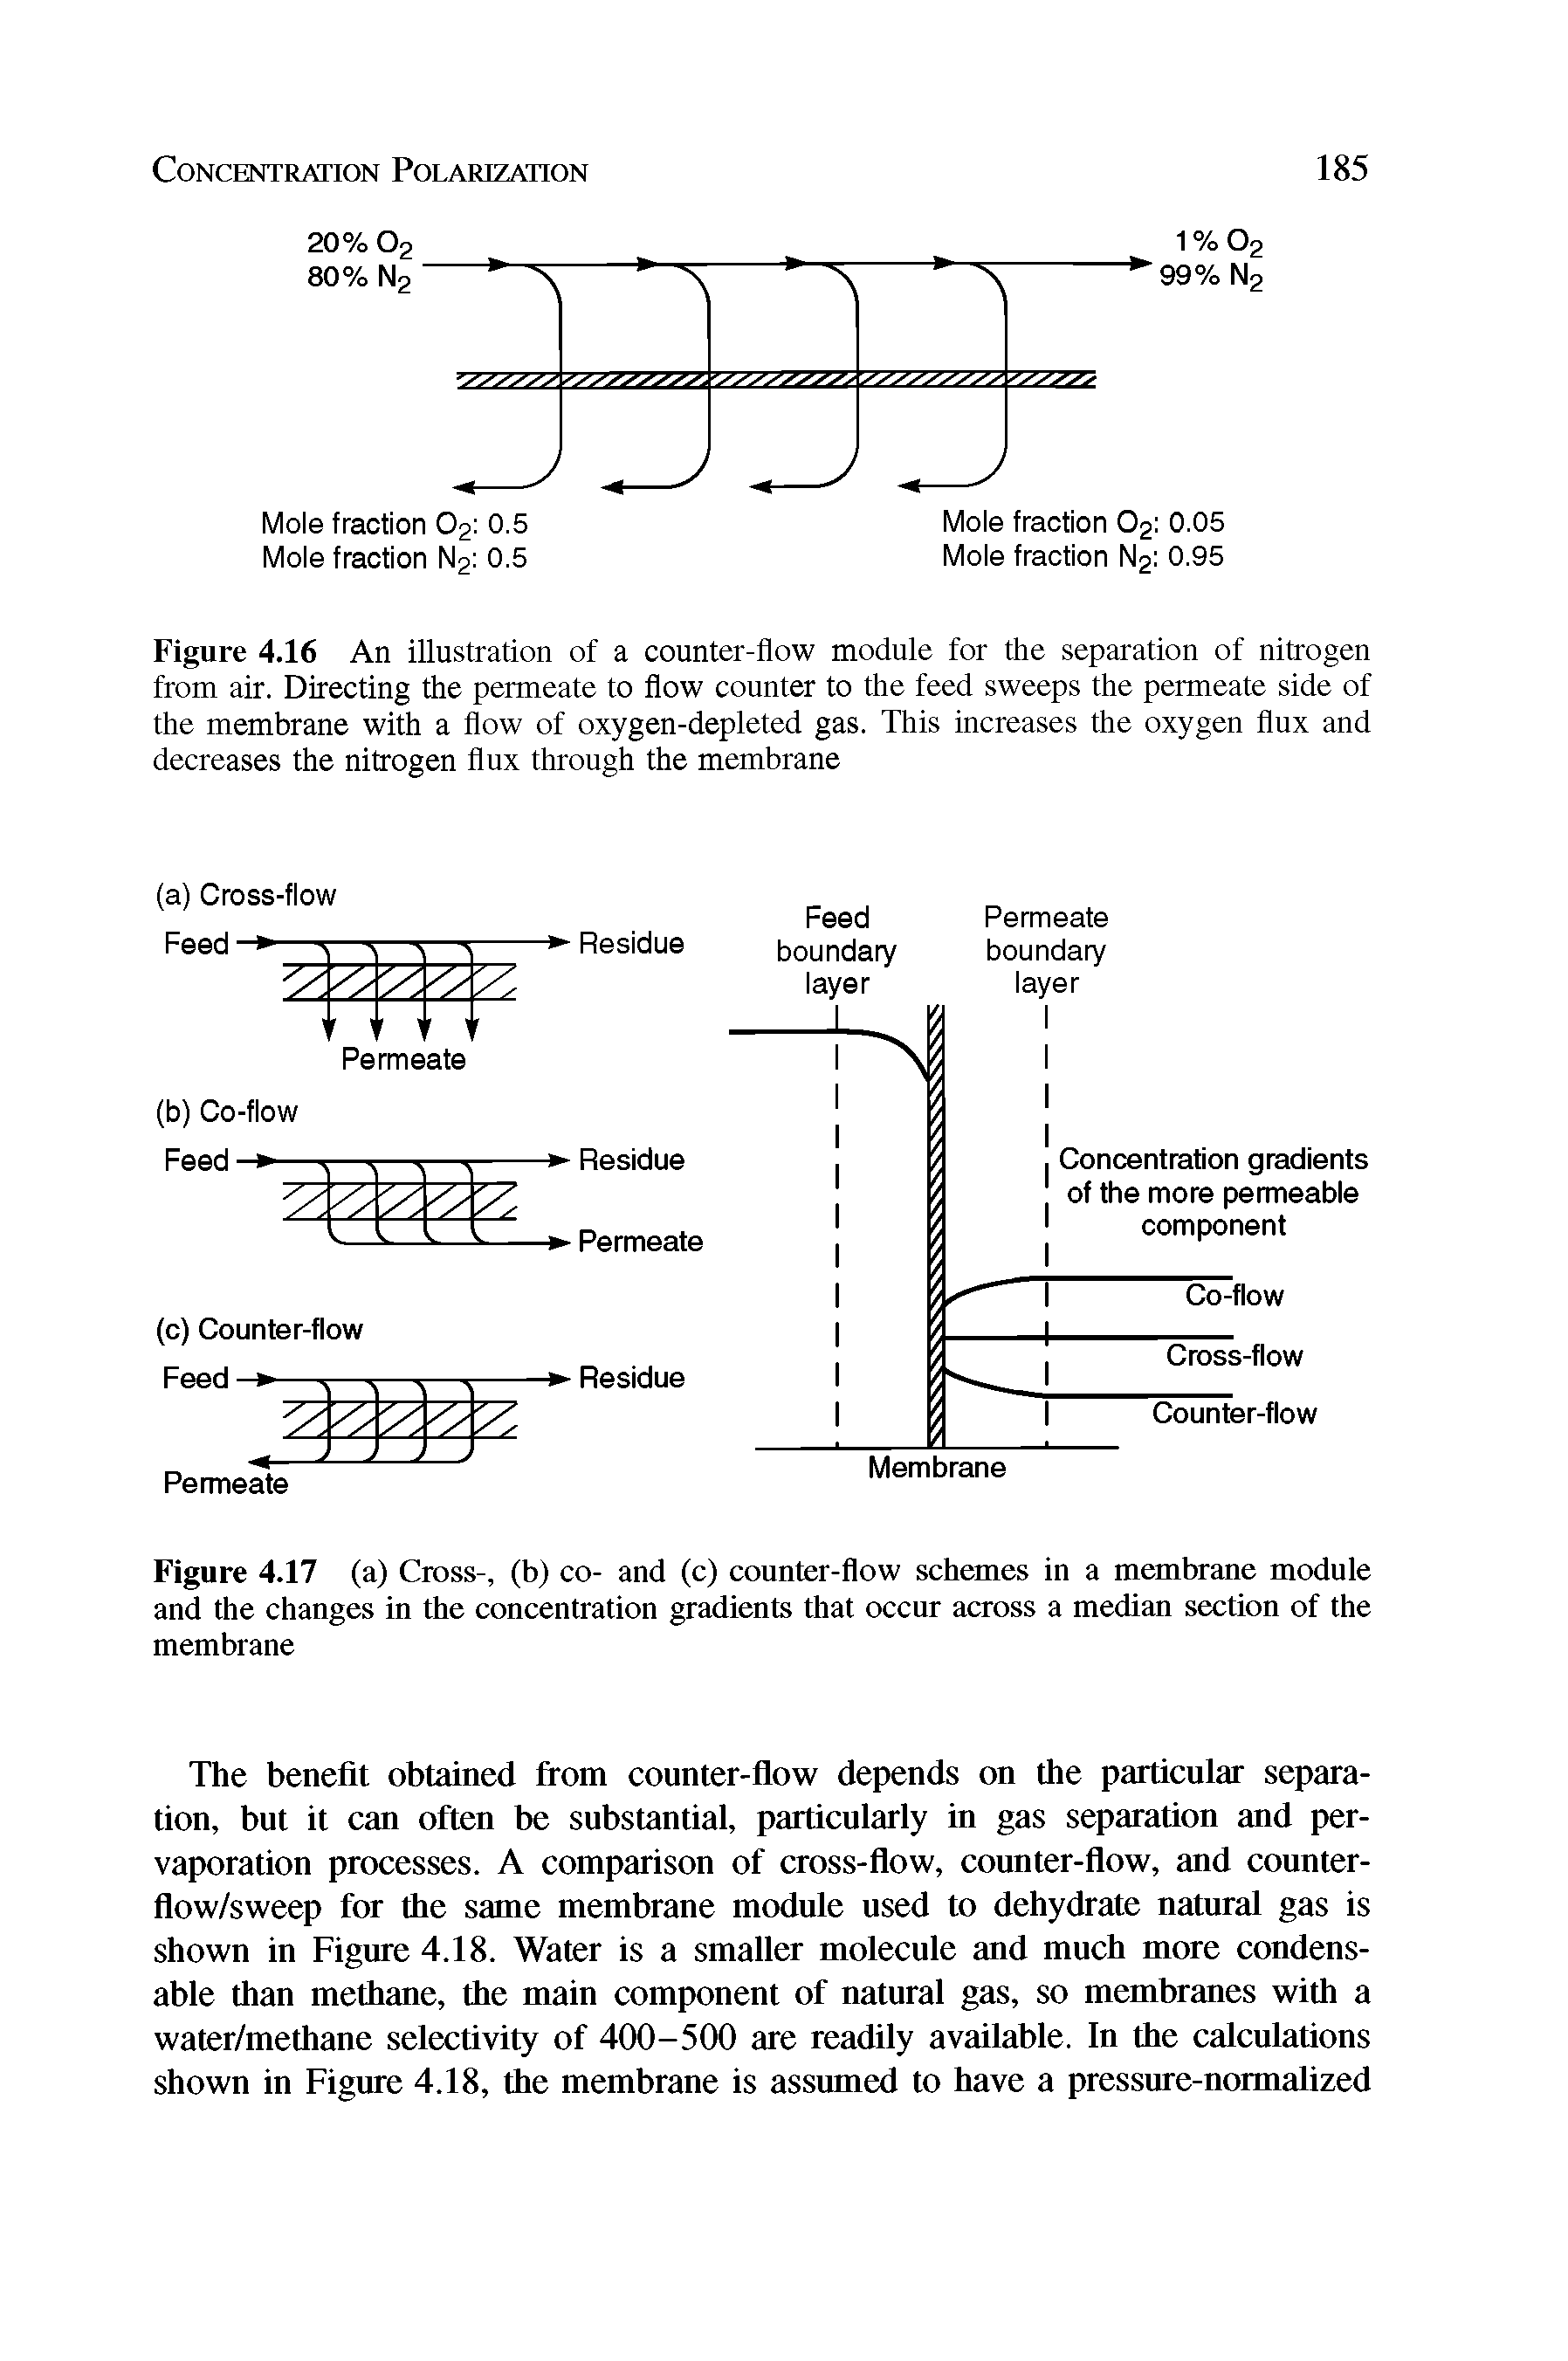 Figure 4.16 An illustration of a counter-flow module for the separation of nitrogen from air. Directing the permeate to flow counter to the feed sweeps the permeate side of the membrane with a flow of oxygen-depleted gas. This increases the oxygen flux and decreases the nitrogen flux through the membrane...